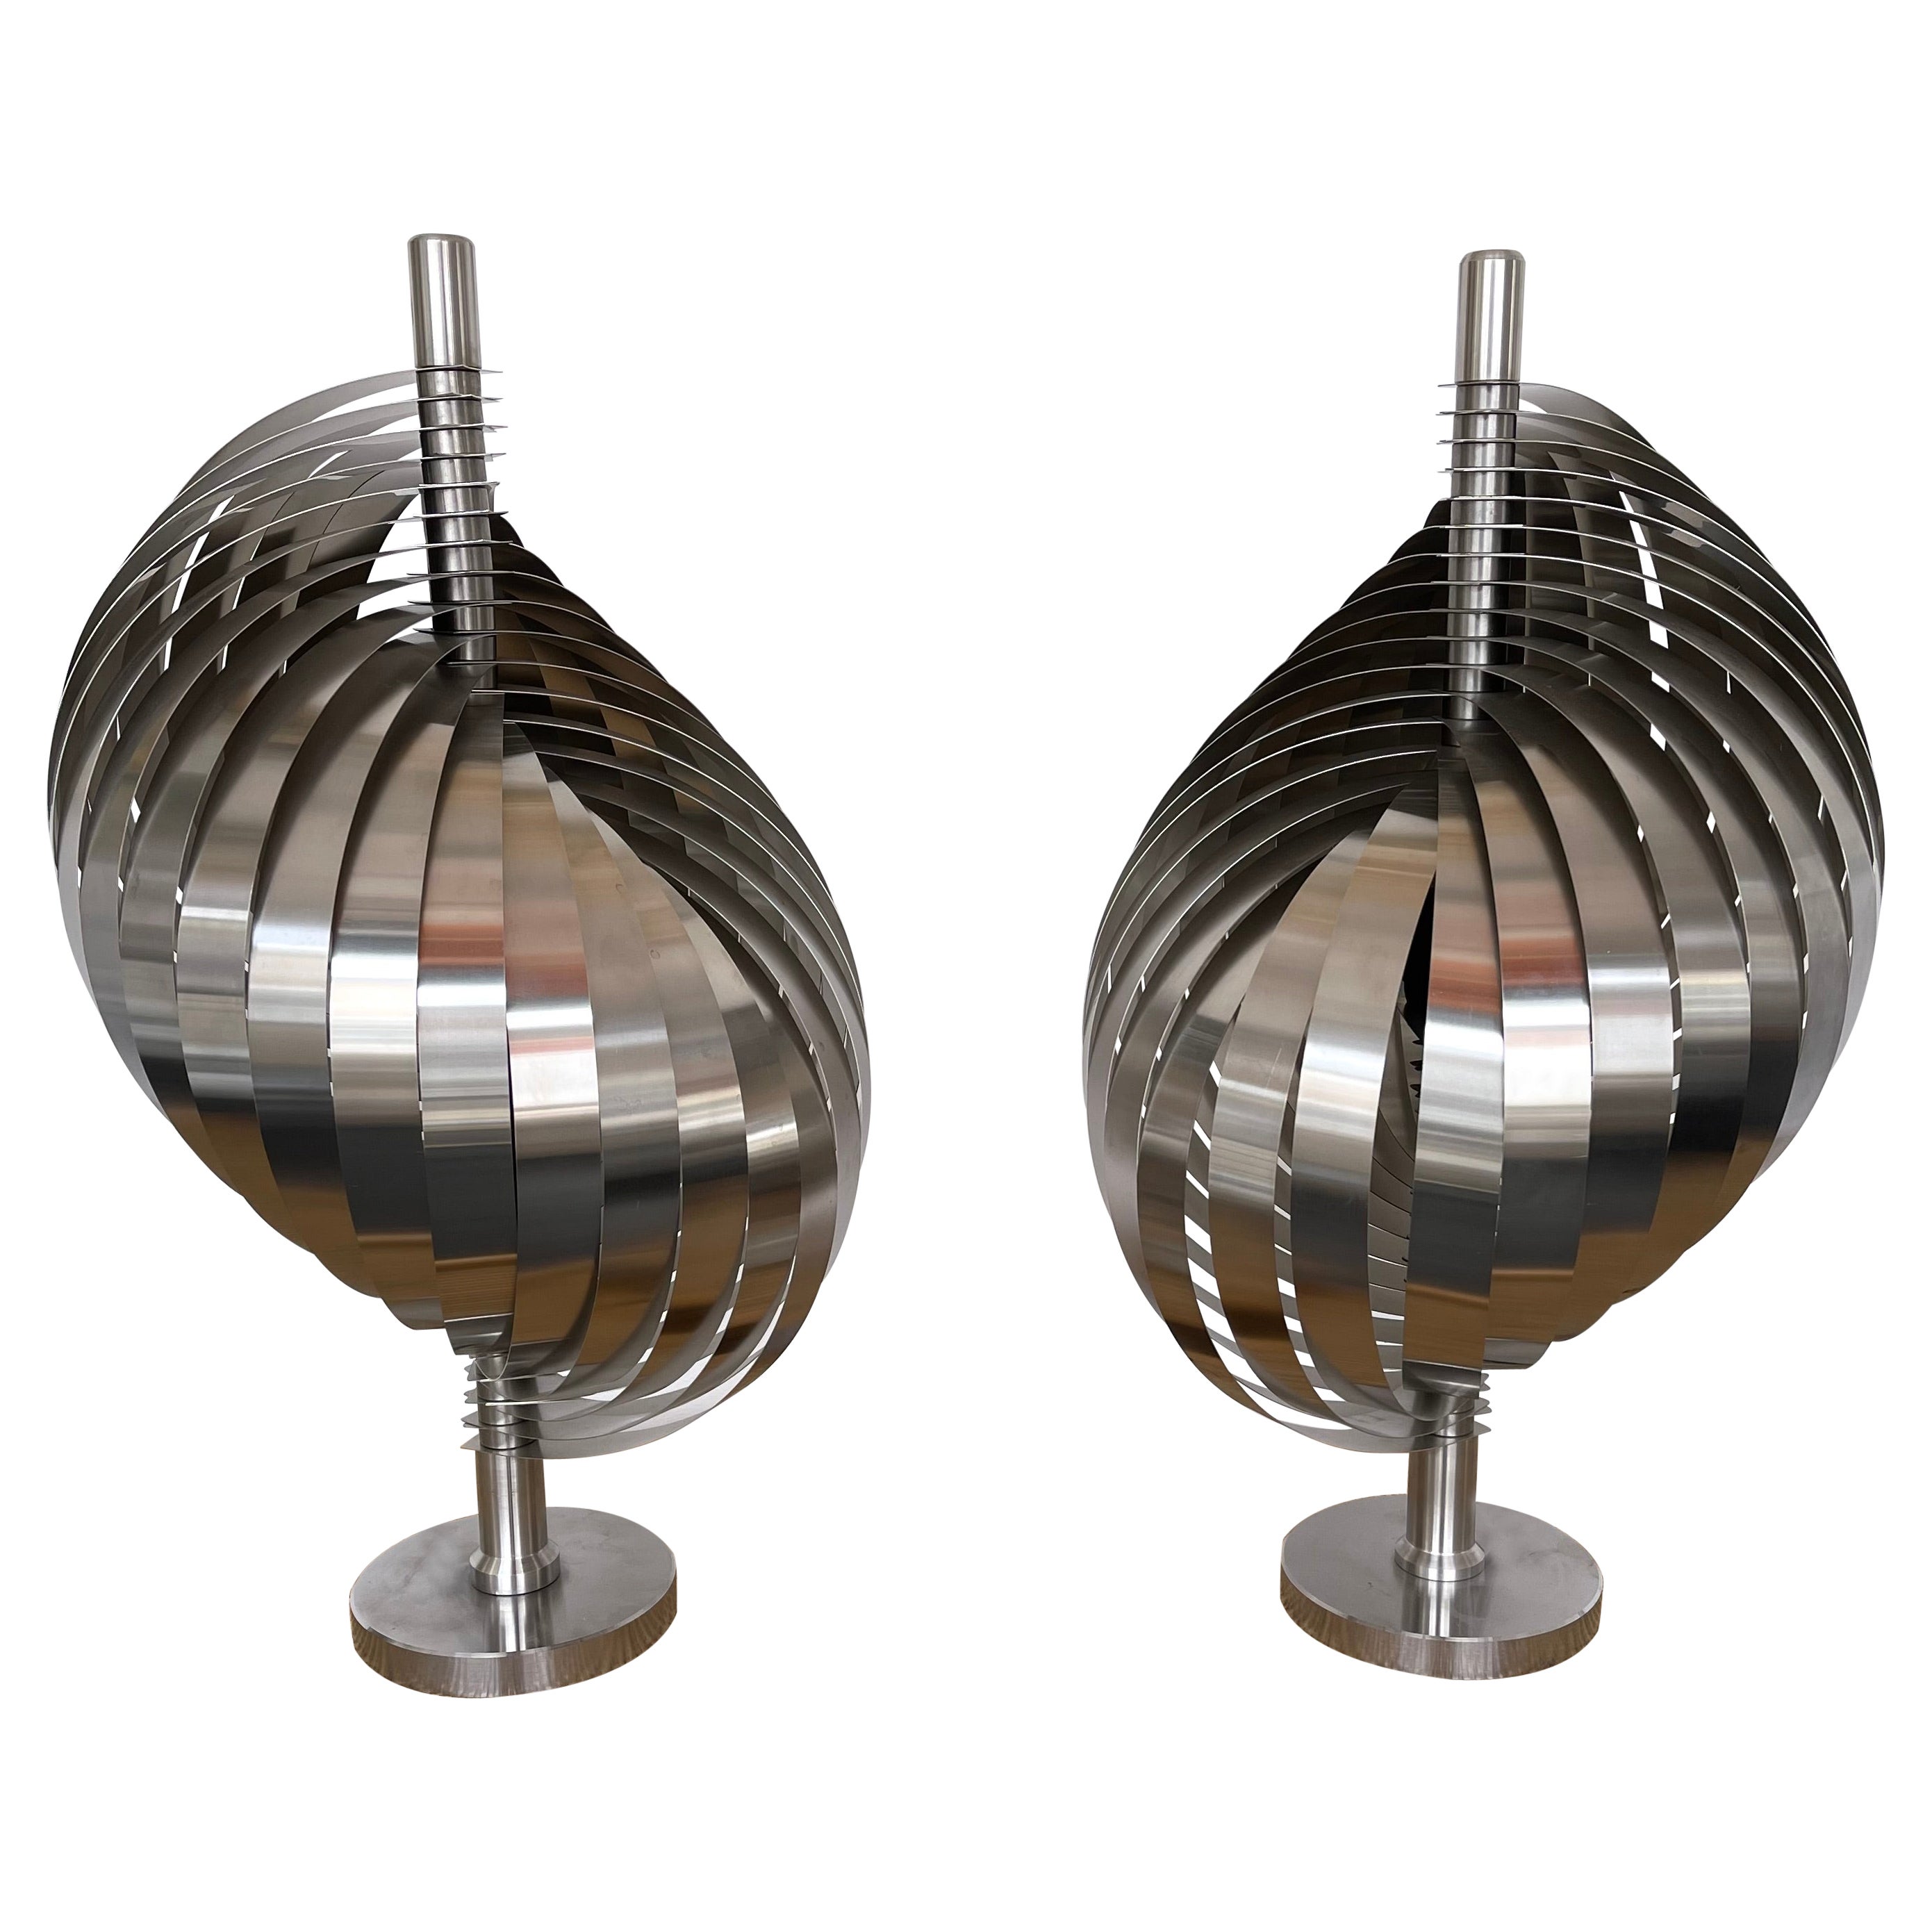 Pair of Metal Spiral Table Lamps by Henri Mathieu, France, 1970s